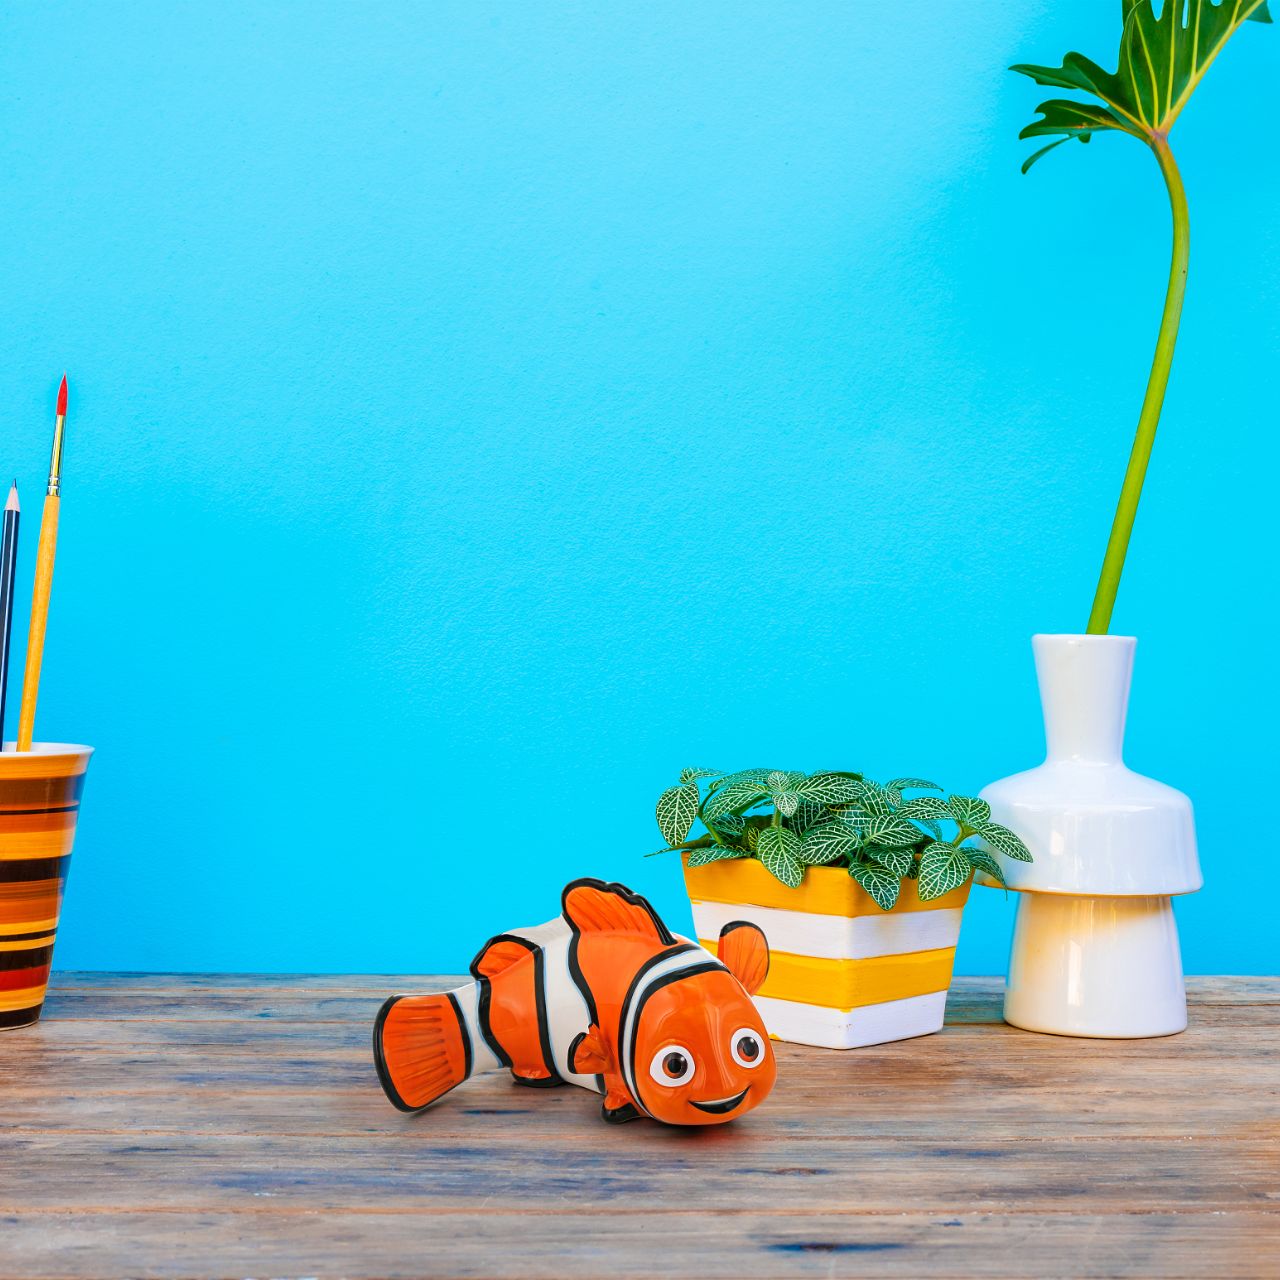 Sharkbait Finding Nemo Money Bank  Featured here is the energetic young clownfish, Sharkbait trying to get back home to the reef and his dad. Save all your pennies is this beautifully sculpted Finding Nemo money bank. The perfect gift for any pixar fan.